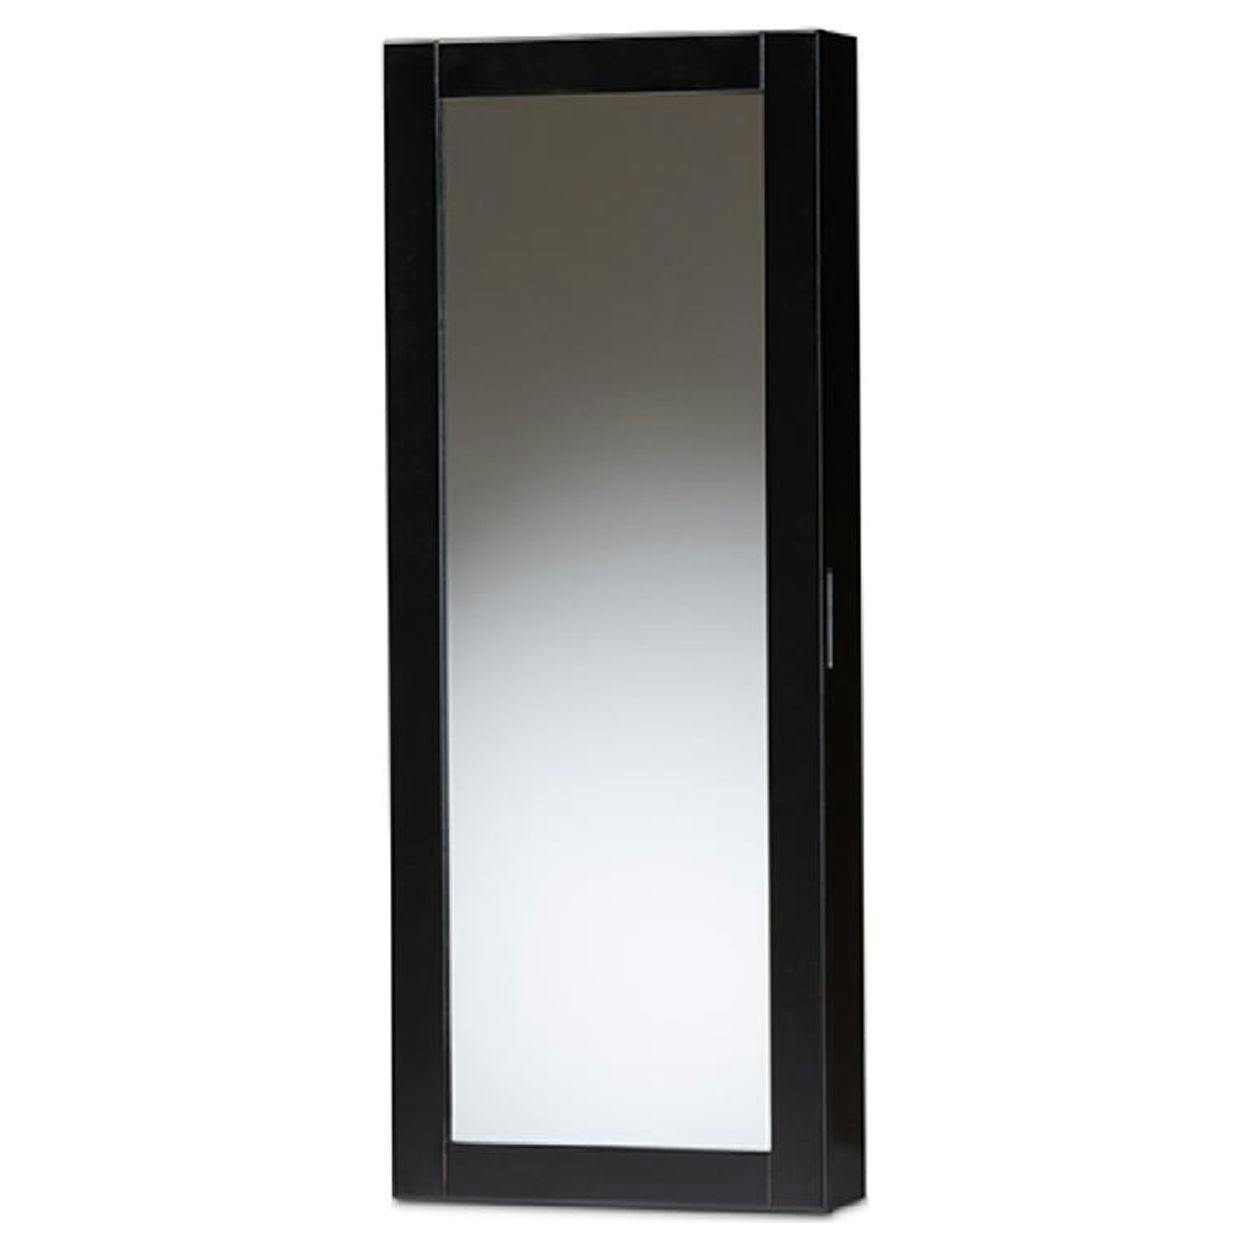 Contemporary Black Wall-Mounted Jewelry Armoire with Full-Length Mirror